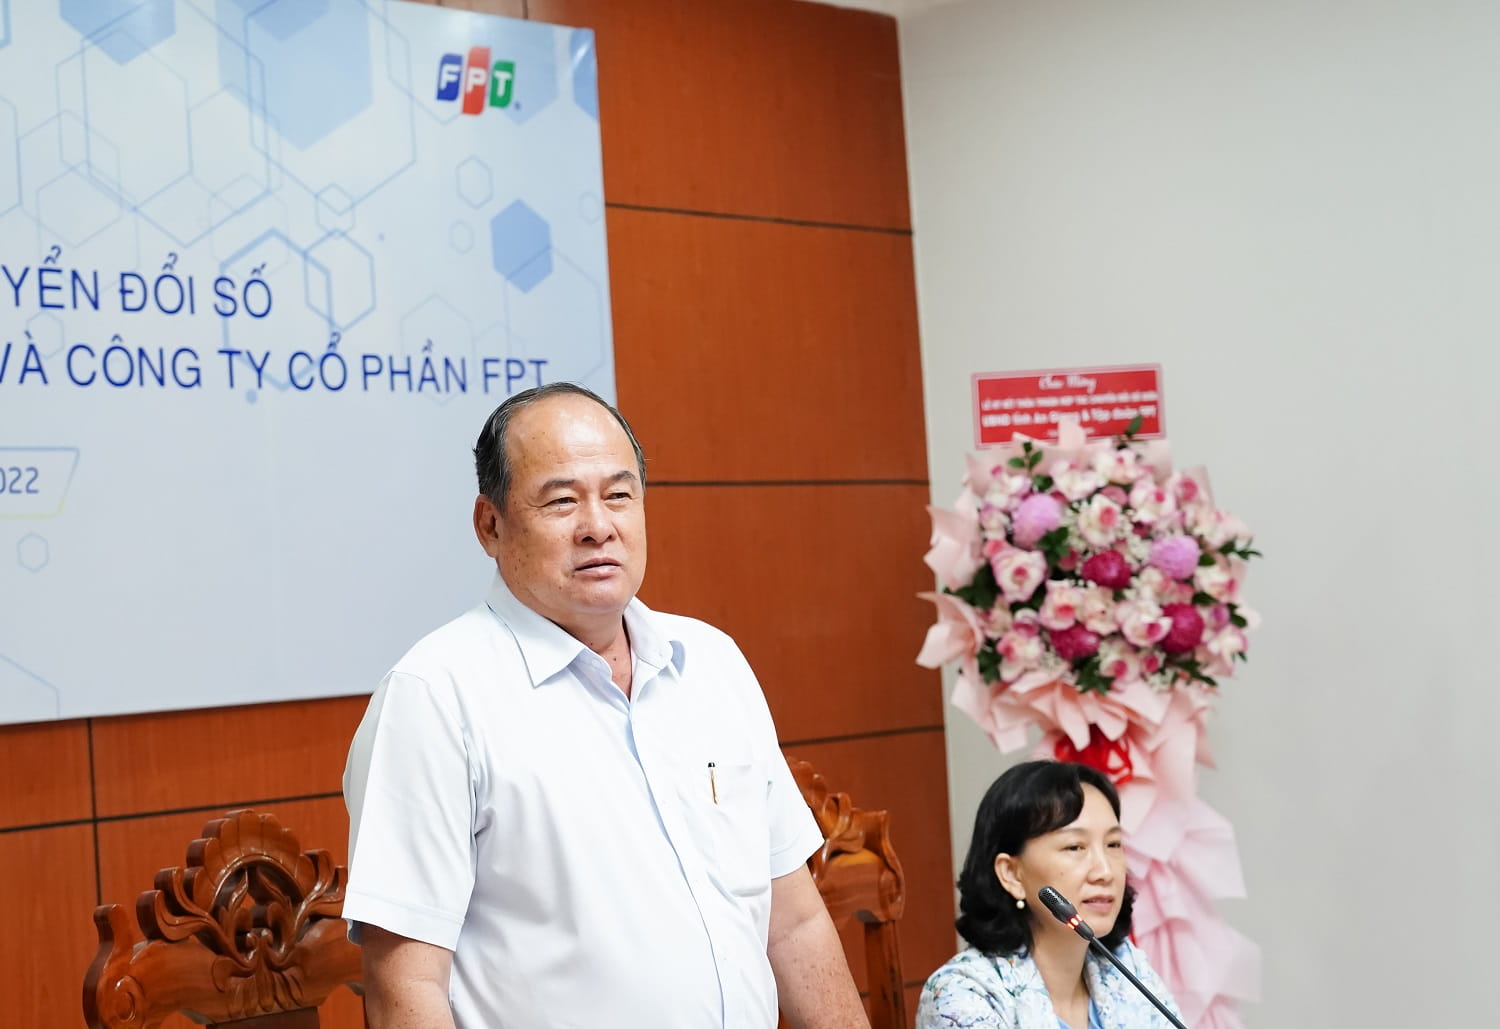 The Chairperson of An Giang People's Committee, Nguyen Thanh Binh, spoke at the Signing Ceremony